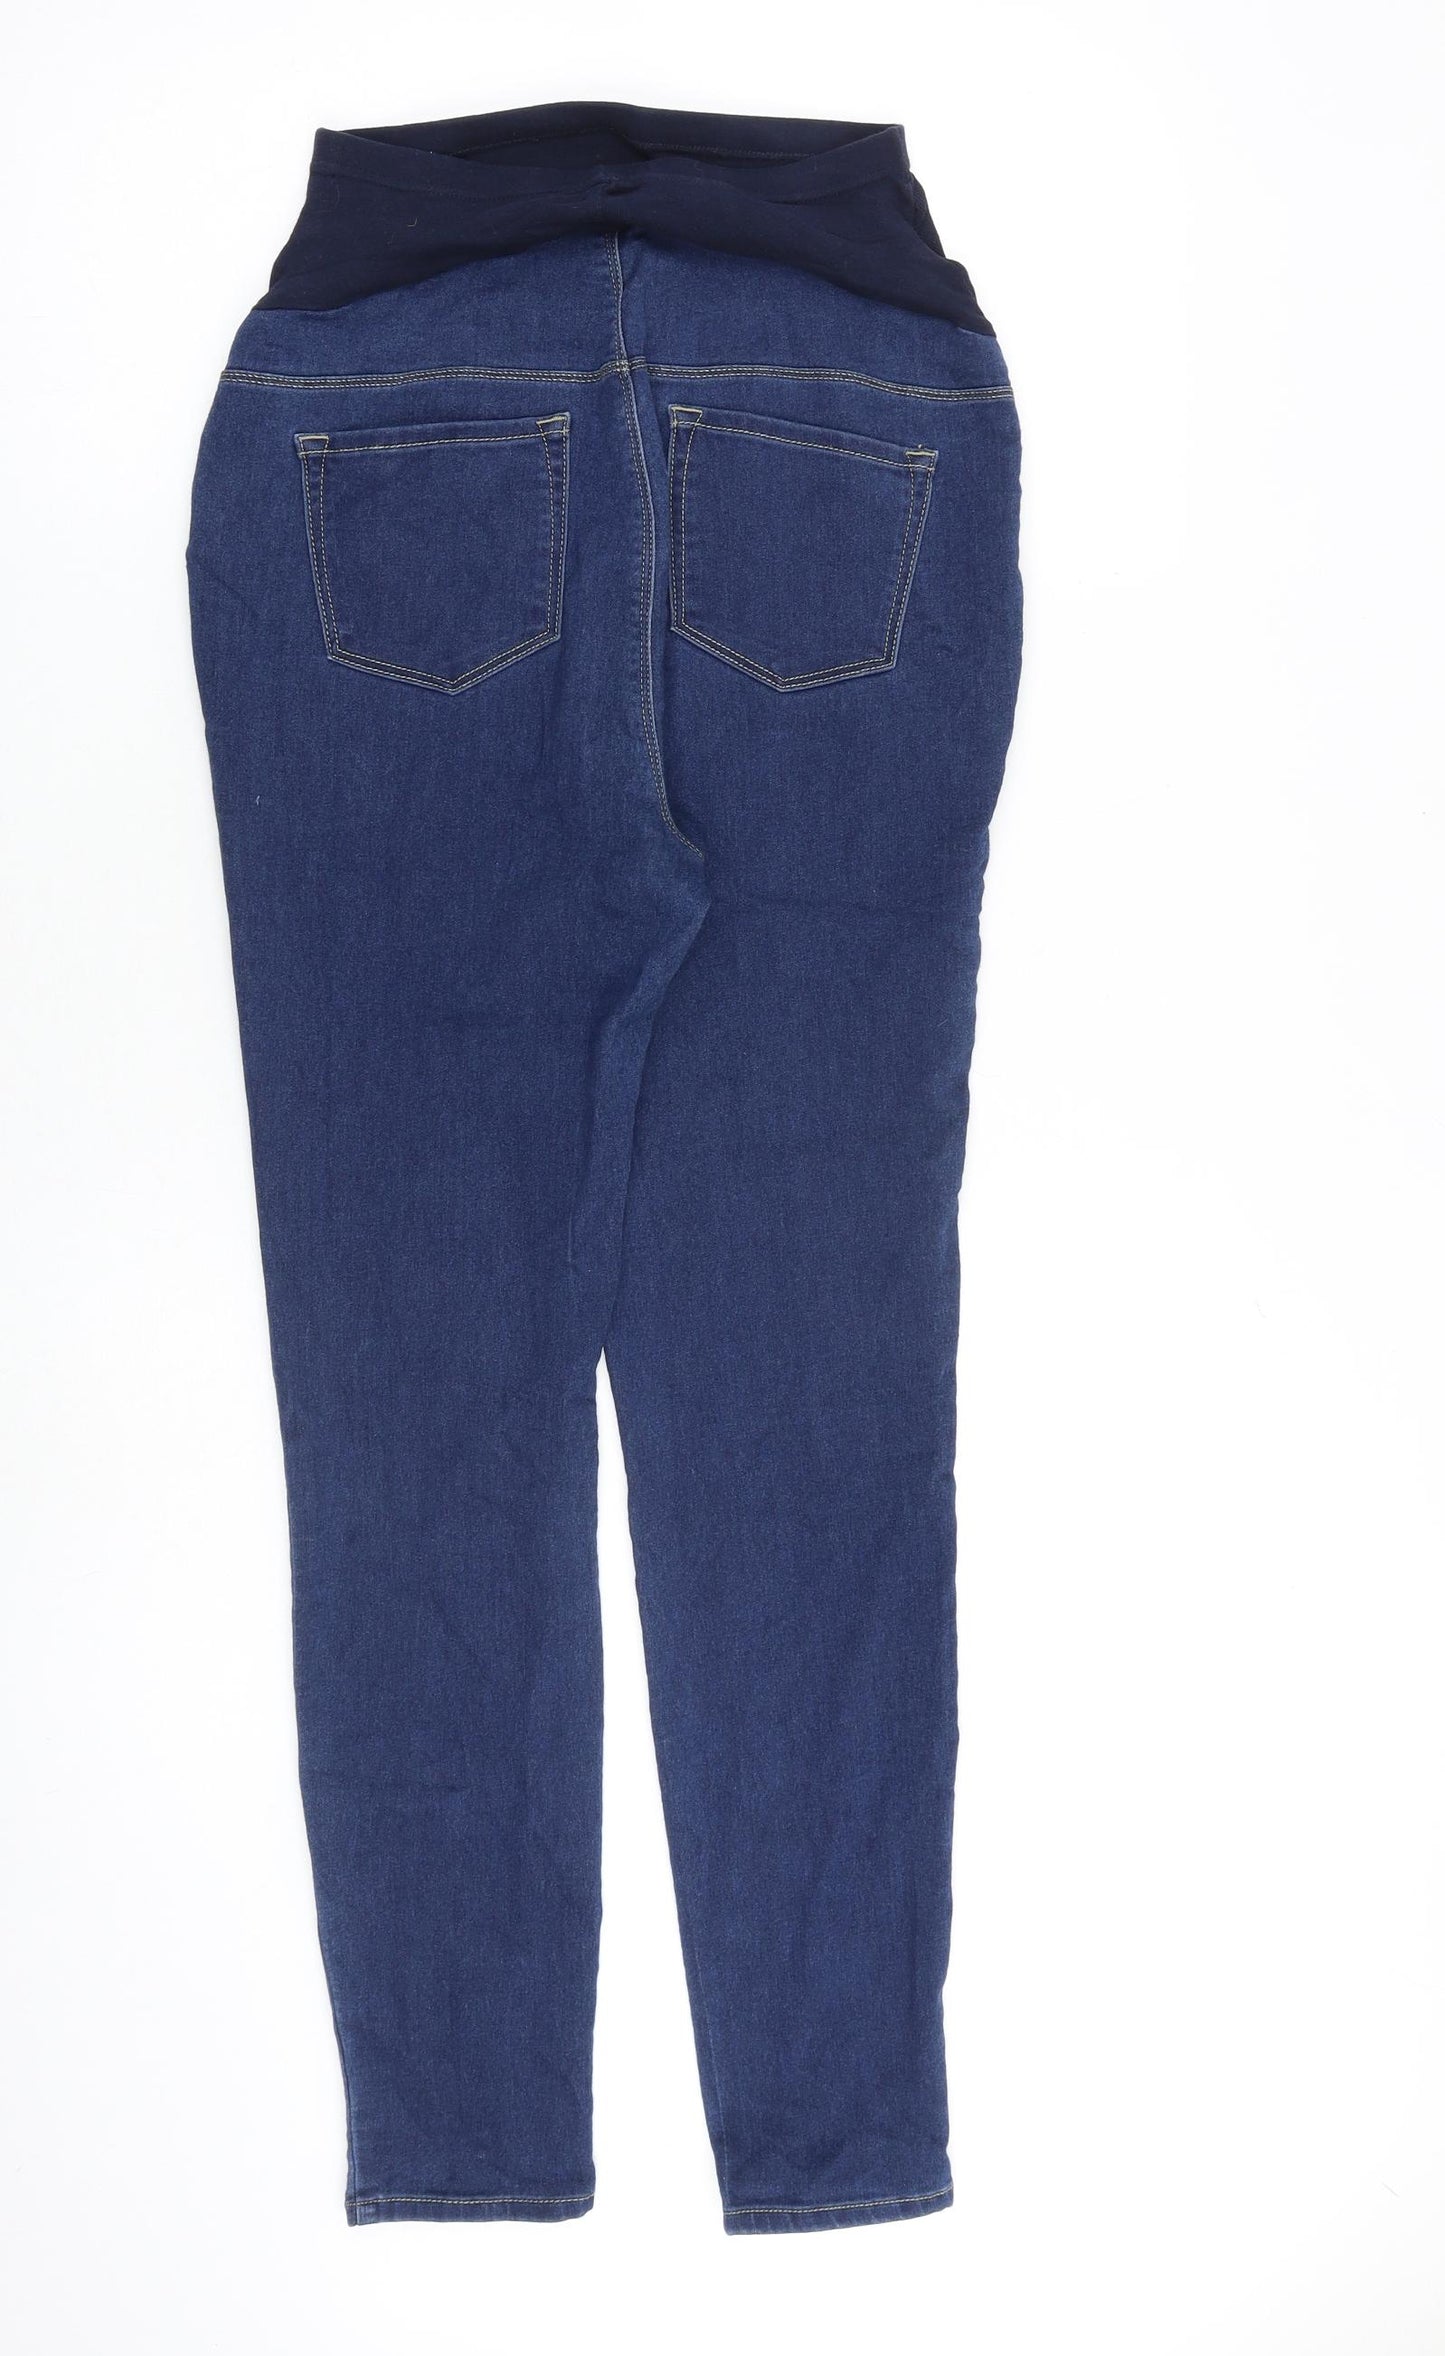 George Womens Blue Cotton Jegging Jeans Size 10 L29 in Regular